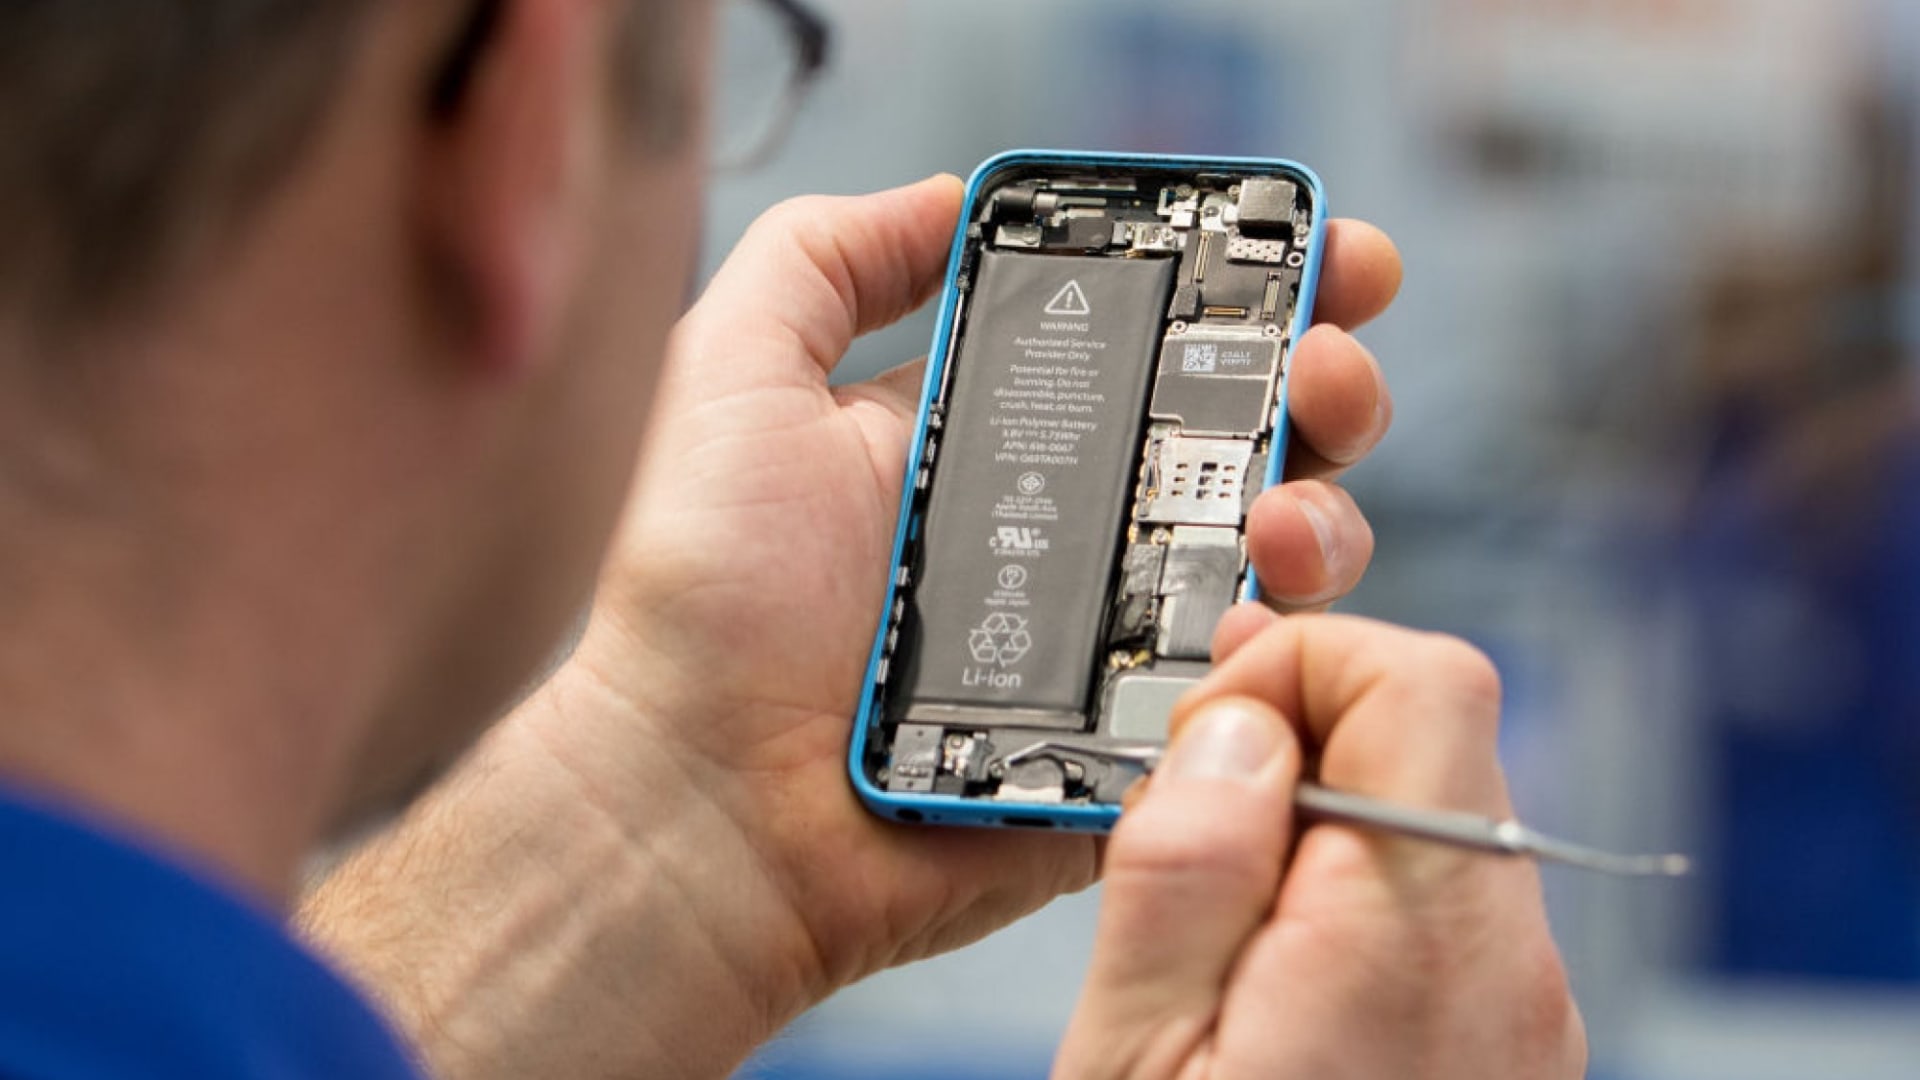 It's Obvious Apple Doesn't Want You to Repair Your Own iPhone